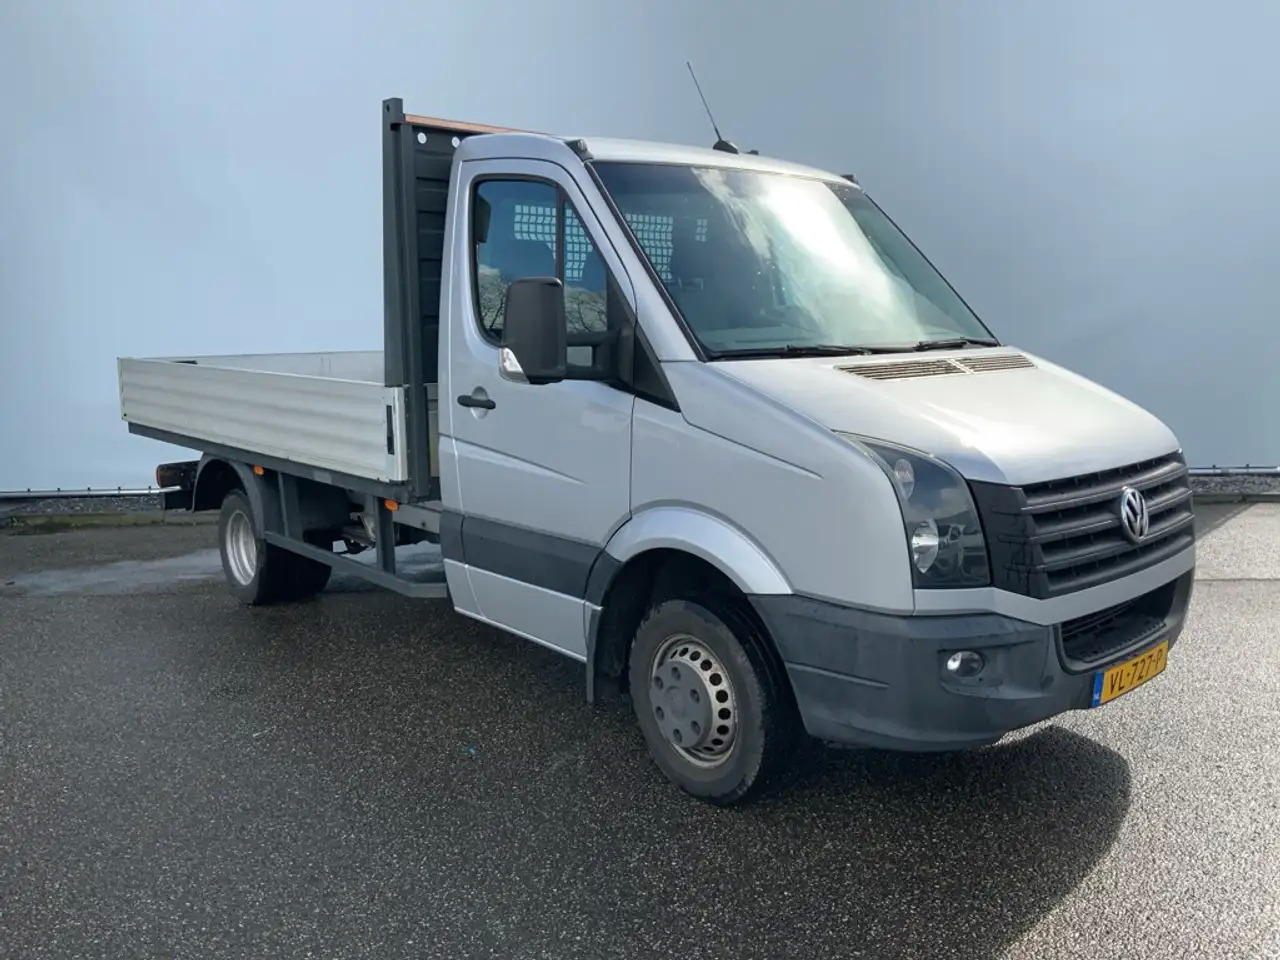 Leasing of Volkswagen Crafter 46 2.0 TDI L2H1 Pick Up Airco Navi Cruise 3 Zits E Volkswagen Crafter 46 2.0 TDI L2H1 Pick Up Airco Navi Cruise 3 Zits E: picture 2